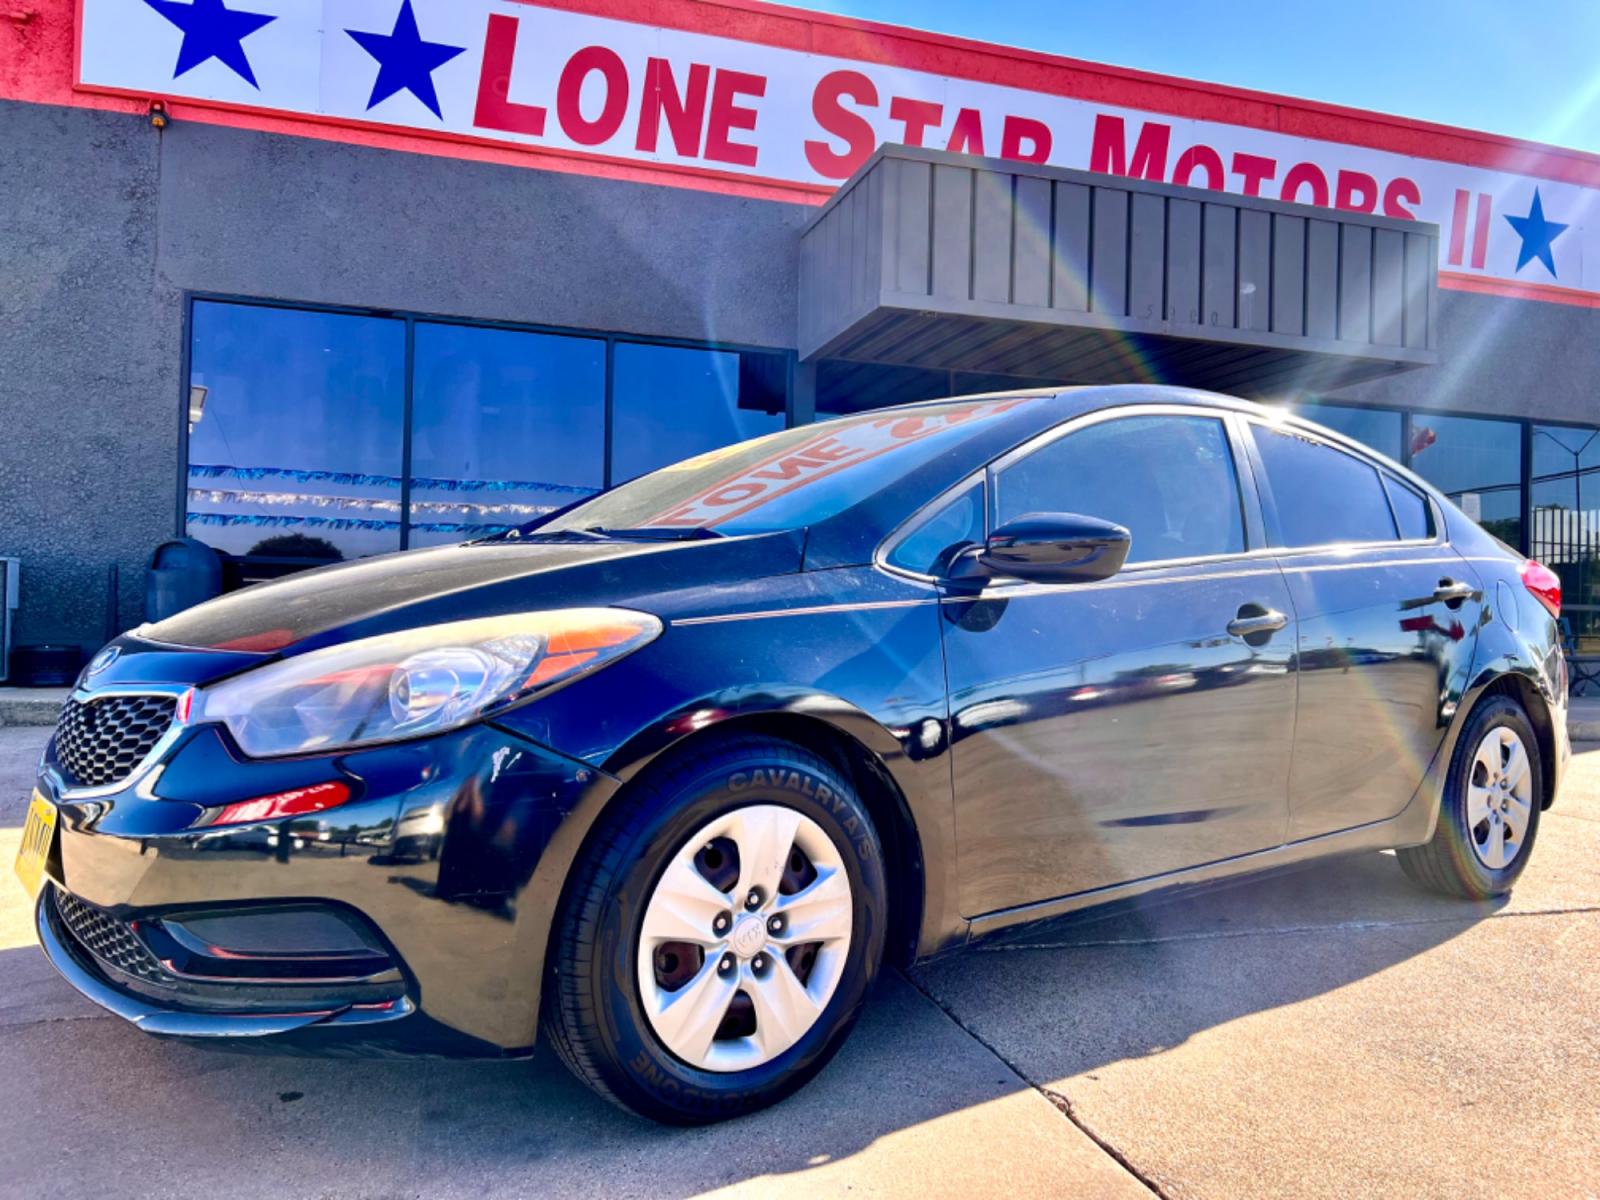 2016 BLACK KIA FORTE LX (KNAFK4A61G5) , located at 5900 E. Lancaster Ave., Fort Worth, TX, 76112, (817) 457-5456, 0.000000, 0.000000 - Cash CASH CAR ONLY, NO FINANCING AVAILABLE. THIS 2016 KIA FORTE LX 4 DOOR SEDAN RUNS AND DRIVES GREAT. IT IS EQUIPPED WITH A CD PLAYER, AM/FM RADIO AND AN AUX PORT. THE TIRES ARE IN GOOD CONDITION AND STILL HAVE TREAD LEFT ON THEM. THIS CAR WILL NOT LAST SO ACT FAST! Call or text Frances a - Photo #1